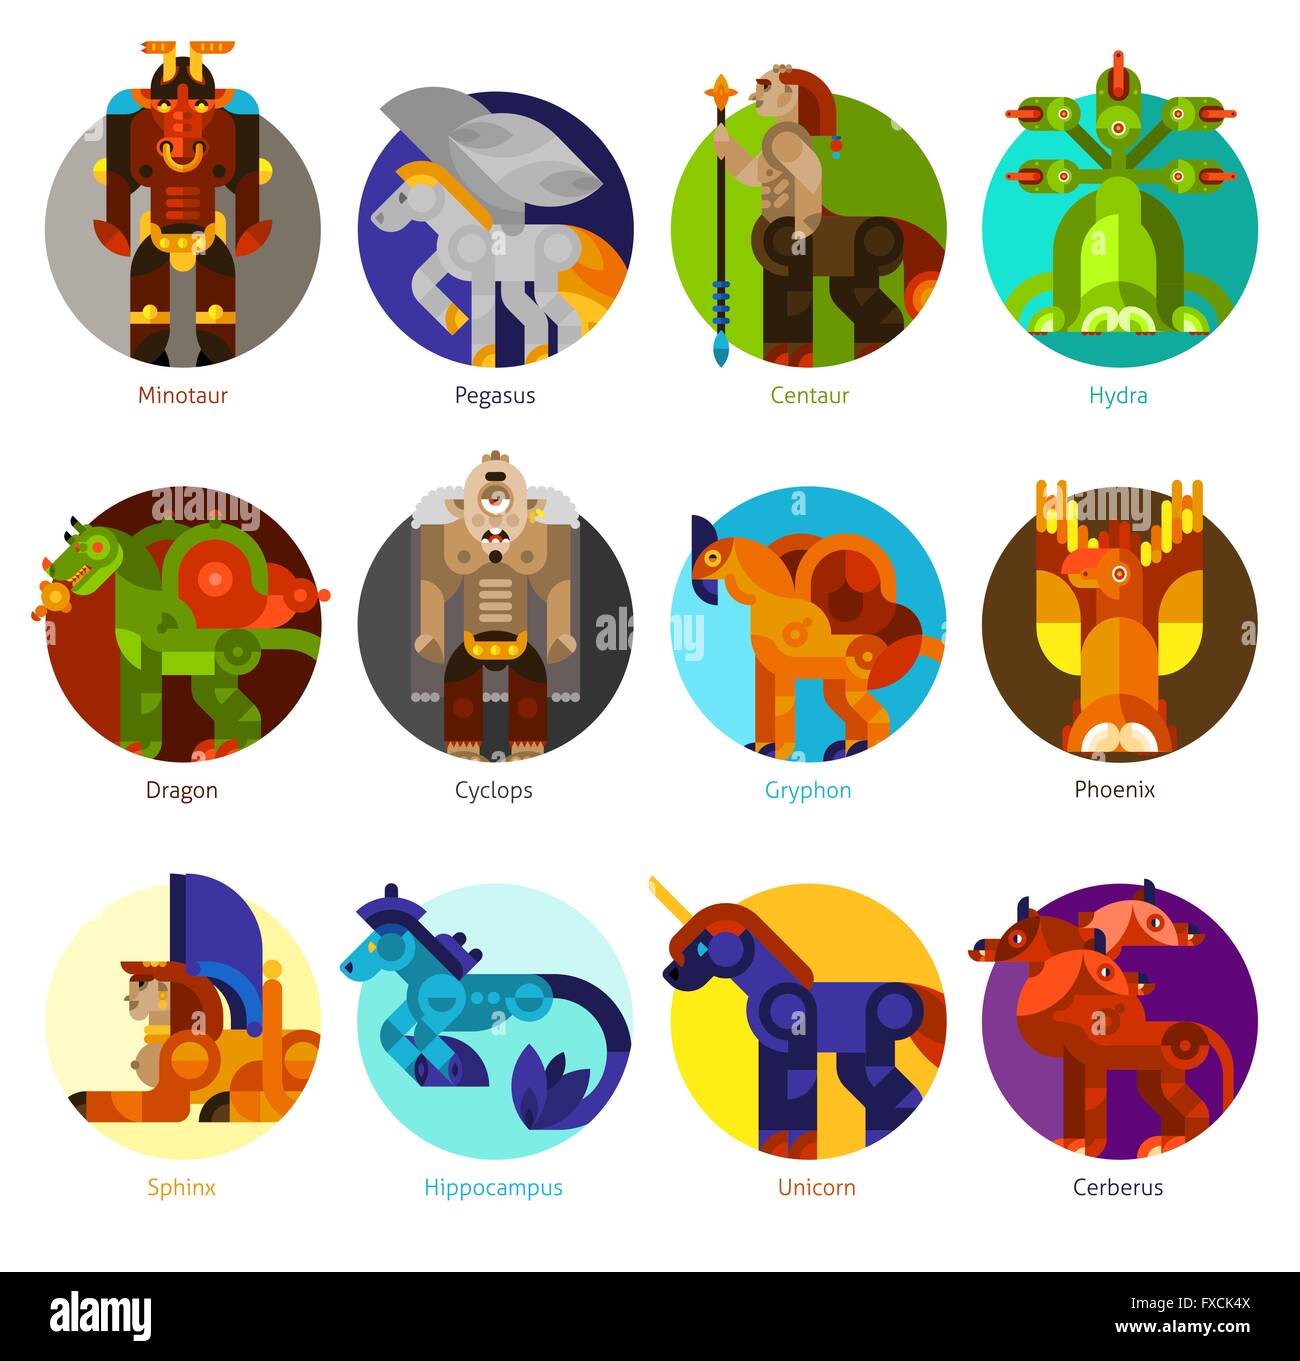 Mythical creatures icons set Stock Vector